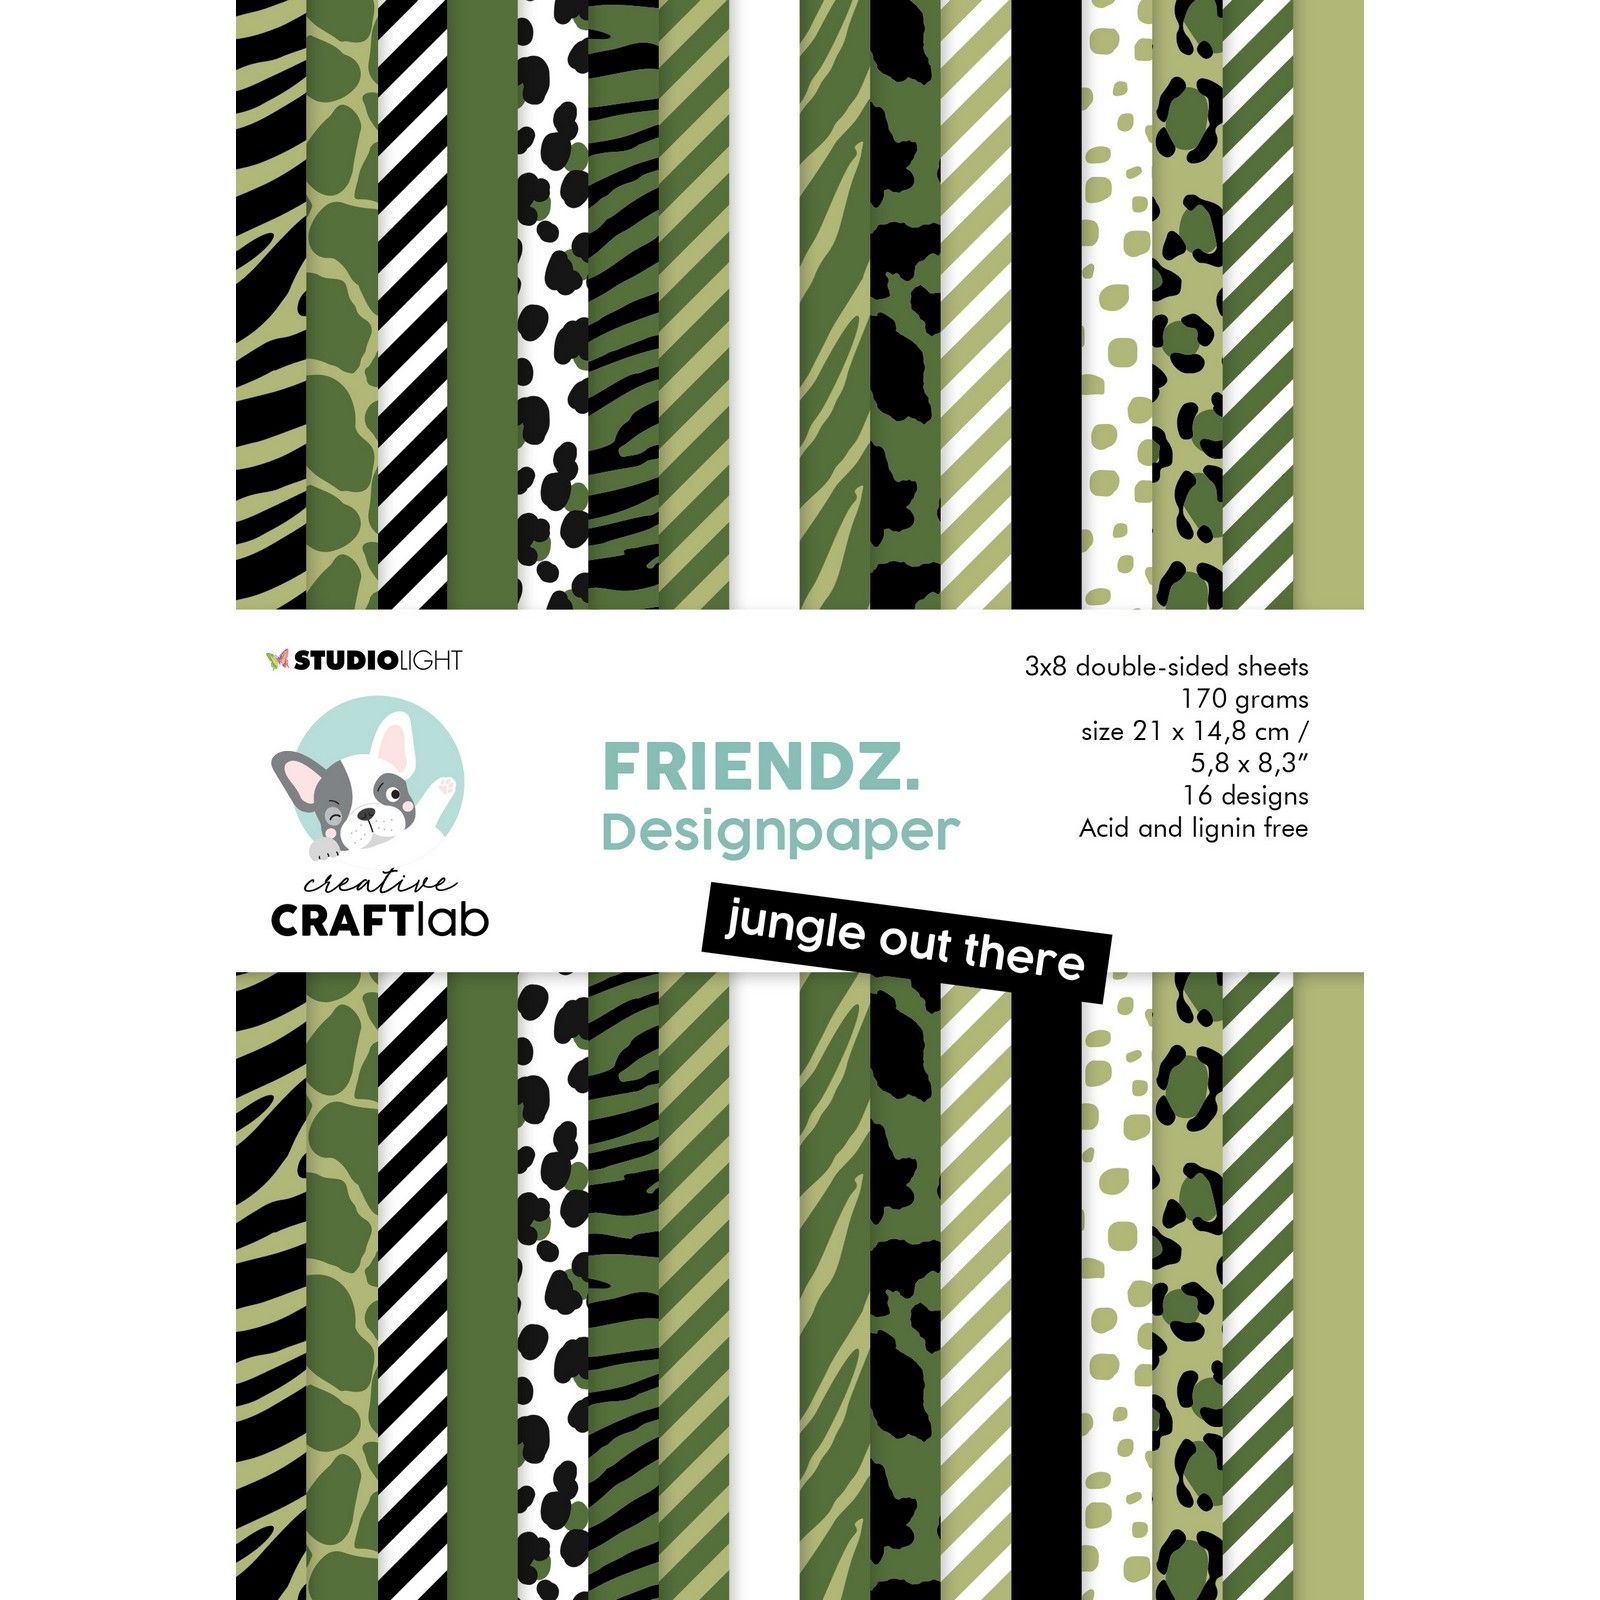 Creative Craftlab • Friendz Paper Pad Jungle Out There